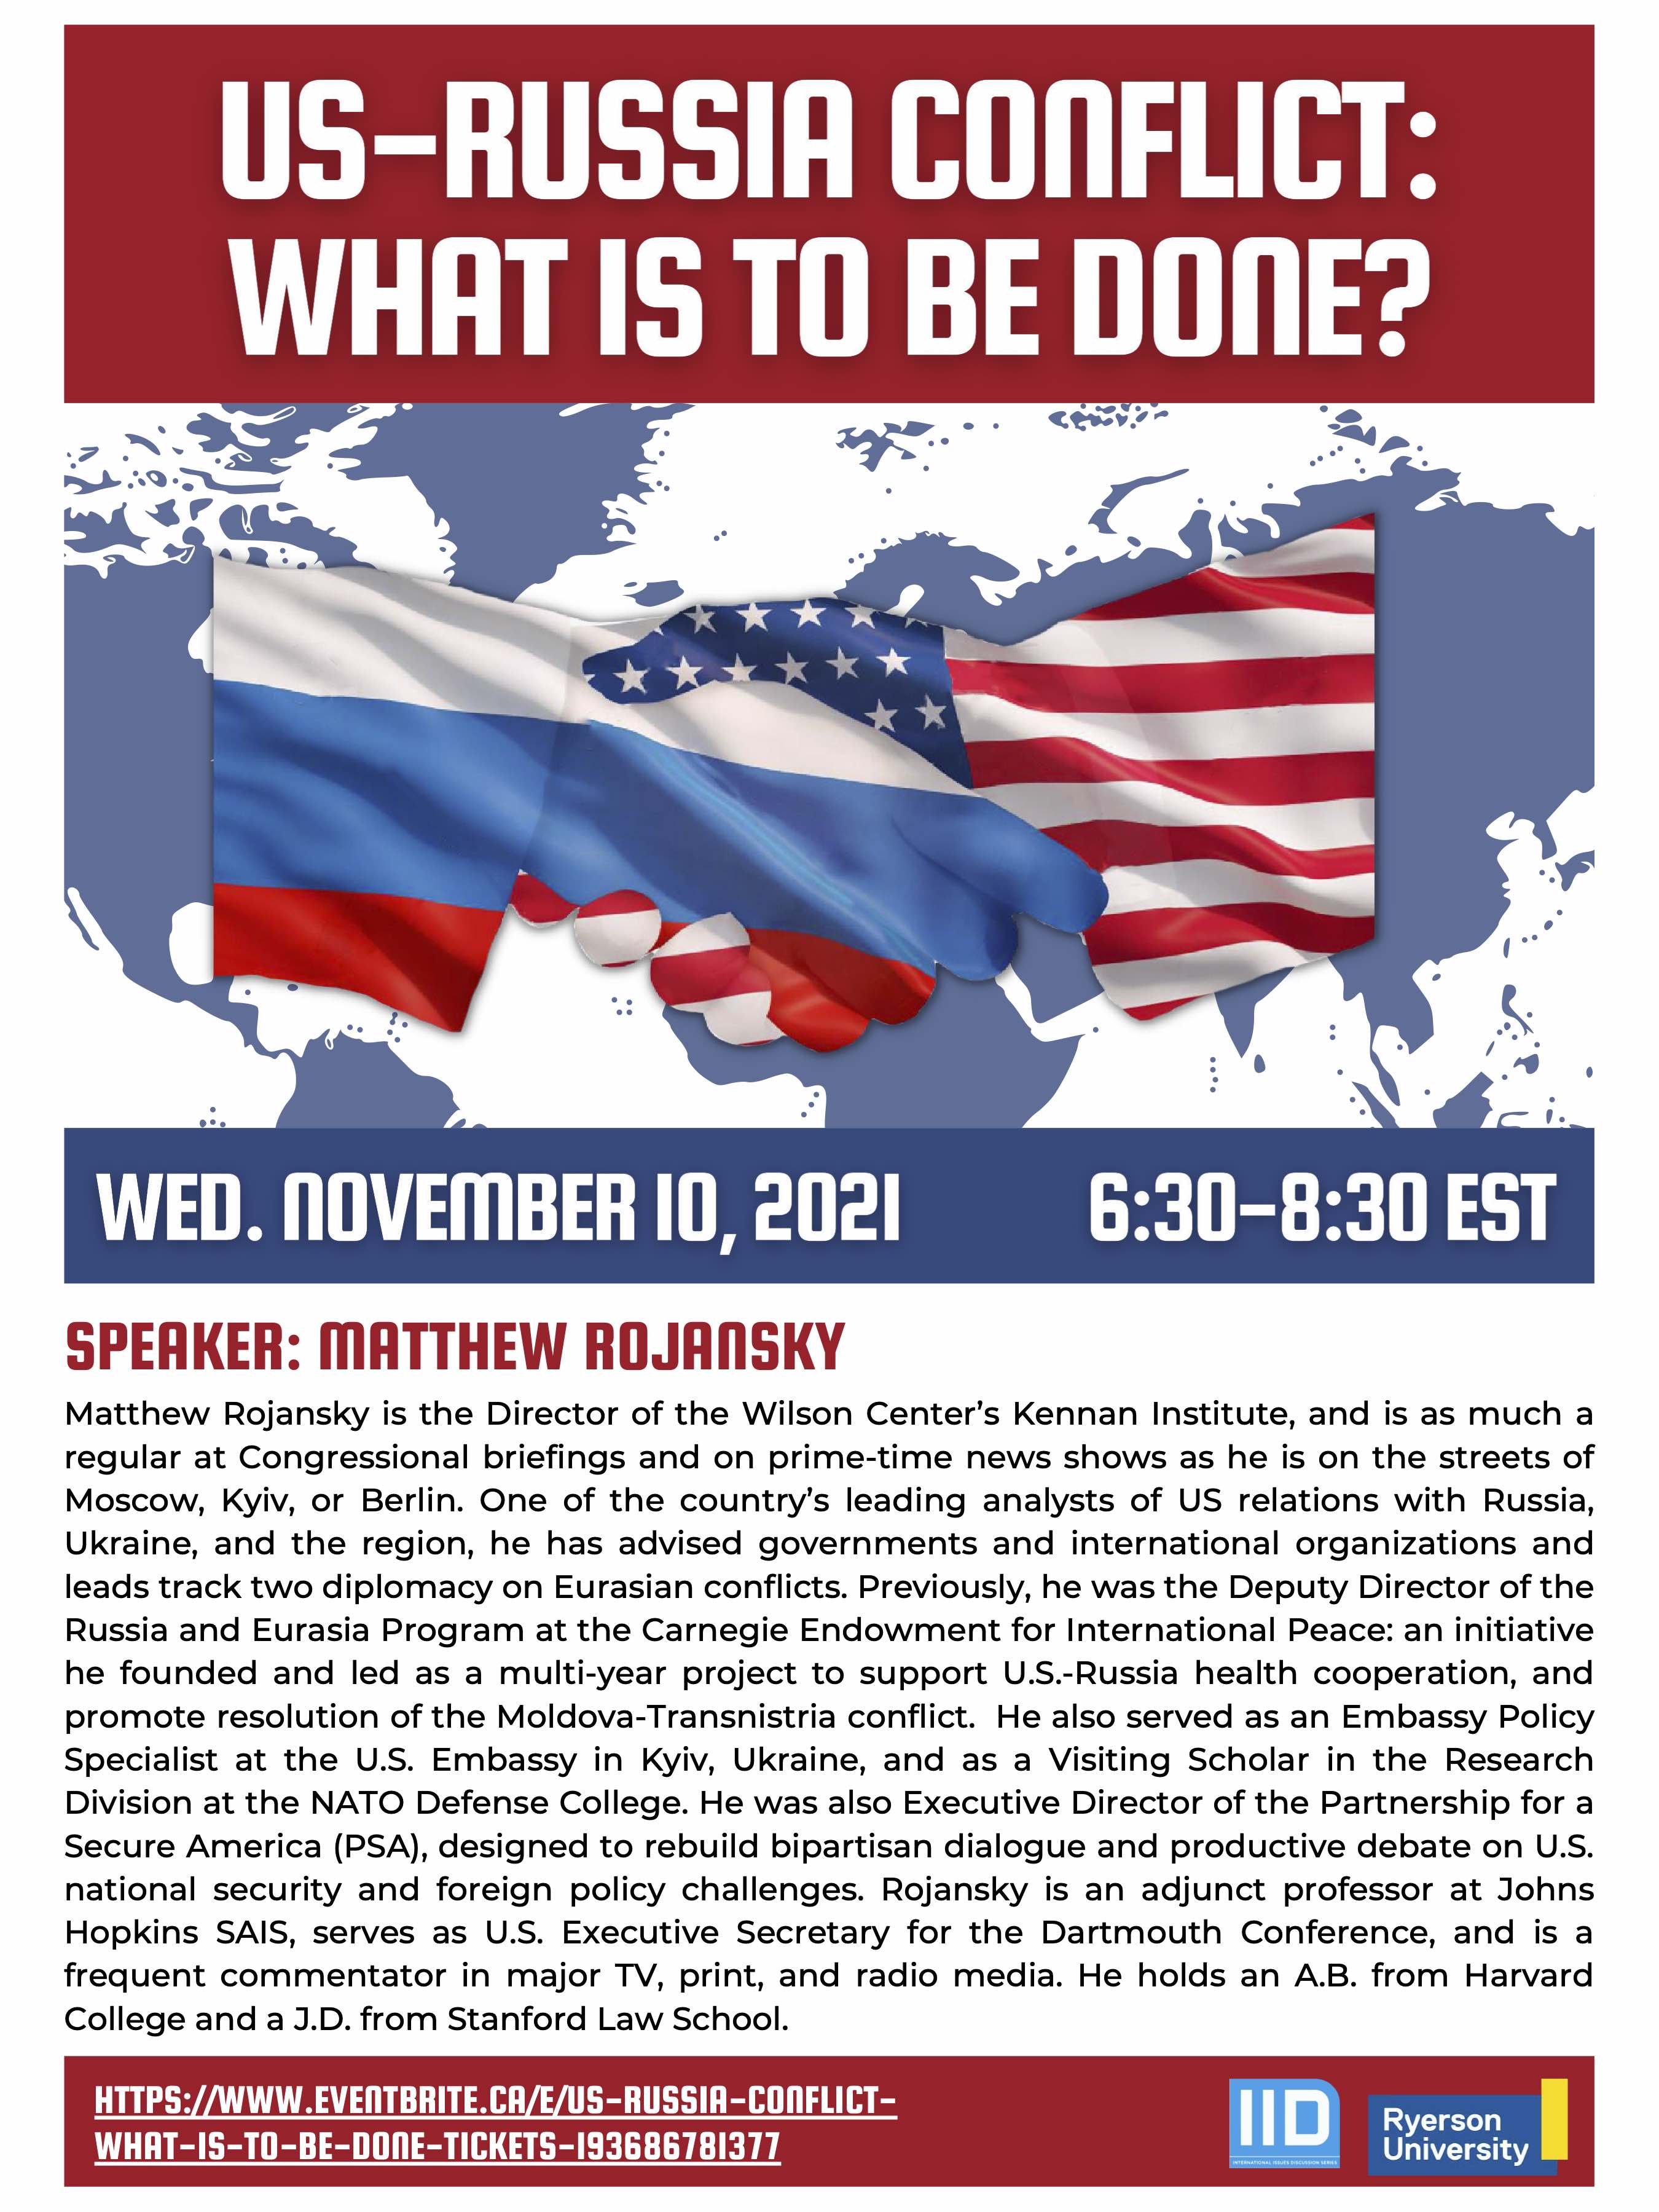 U.S.-Russia Conflict: What is to be Done?